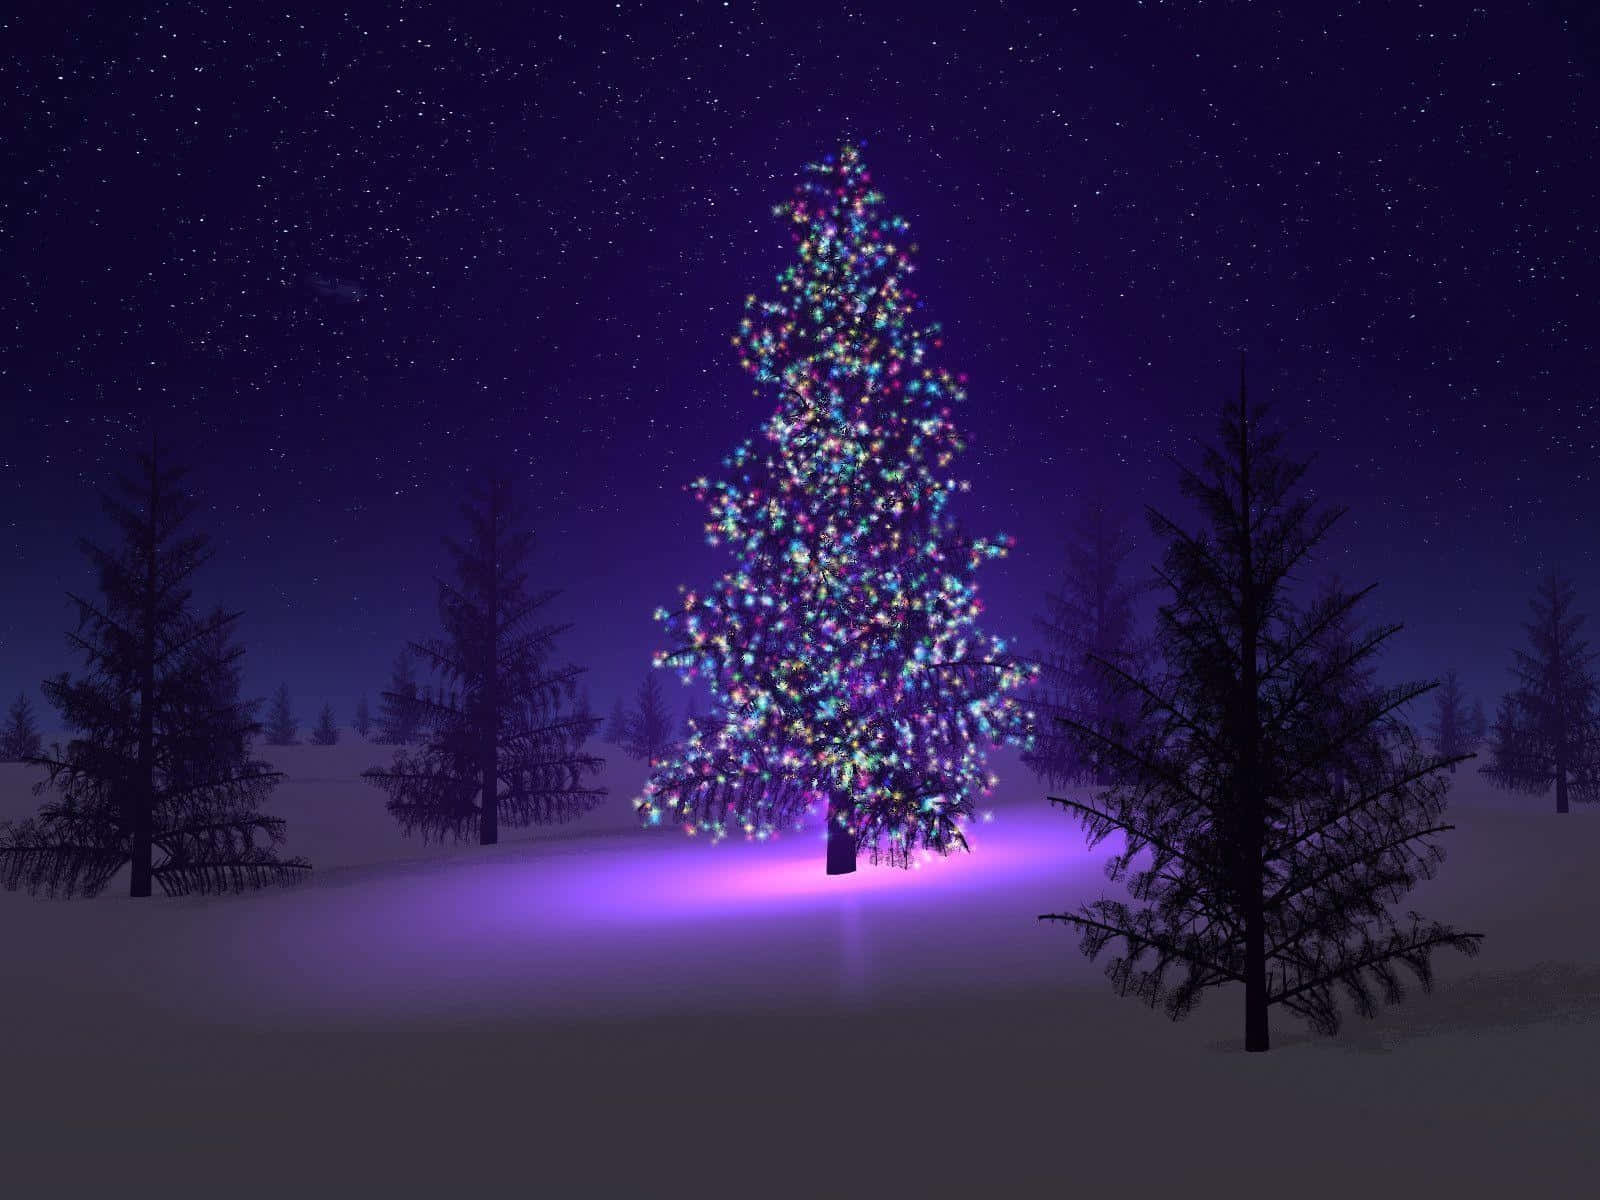 Winter Holiday Desktop Christmas Tree With Colorful Lights Wallpaper